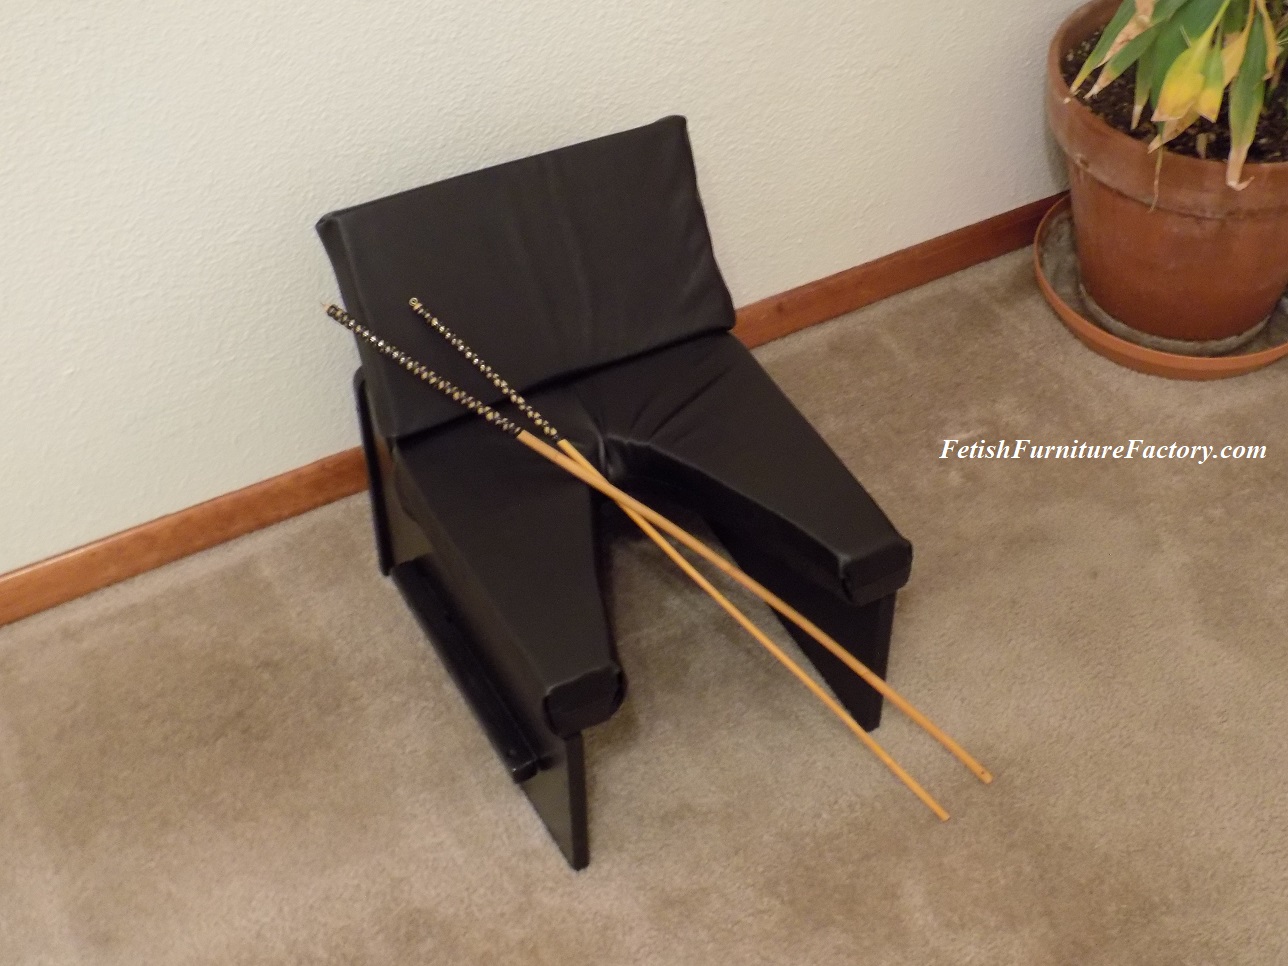 Queening Chairs - Spanking Benches - Bdsm Queening Chair -3816